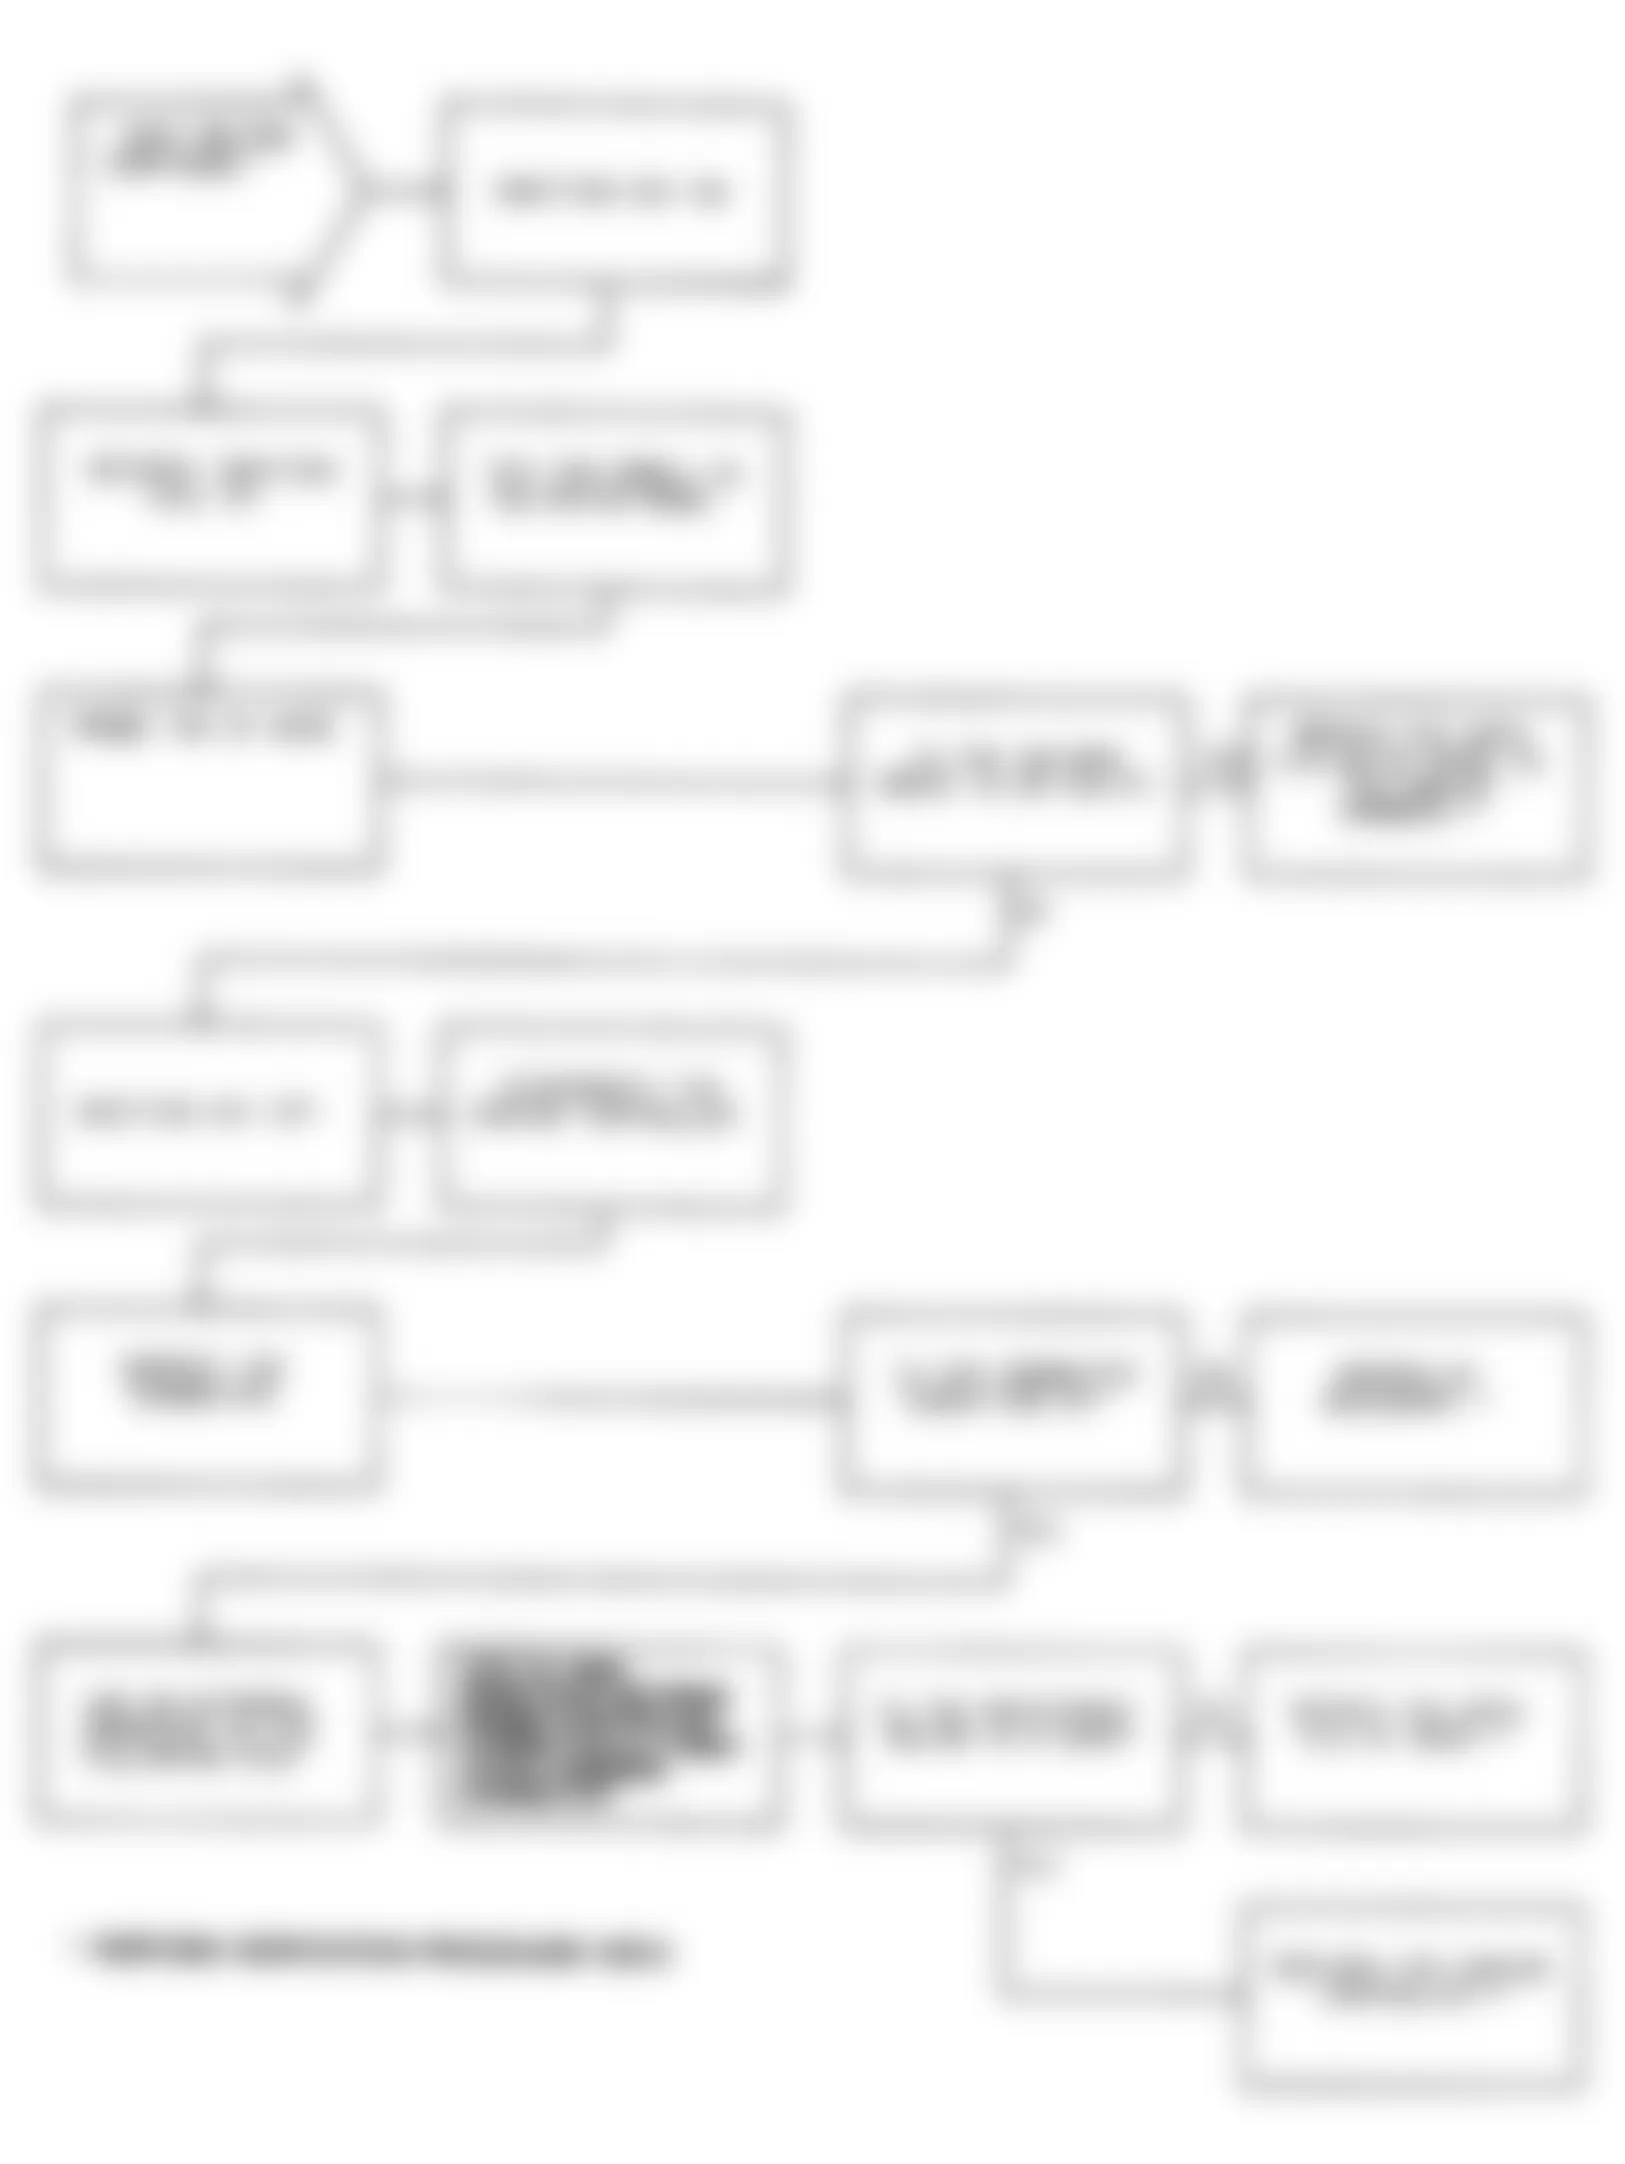 Chrysler Imperial 1991 - Component Locations -  Test DR-29A Code 43: Flowchart (2 of 2)